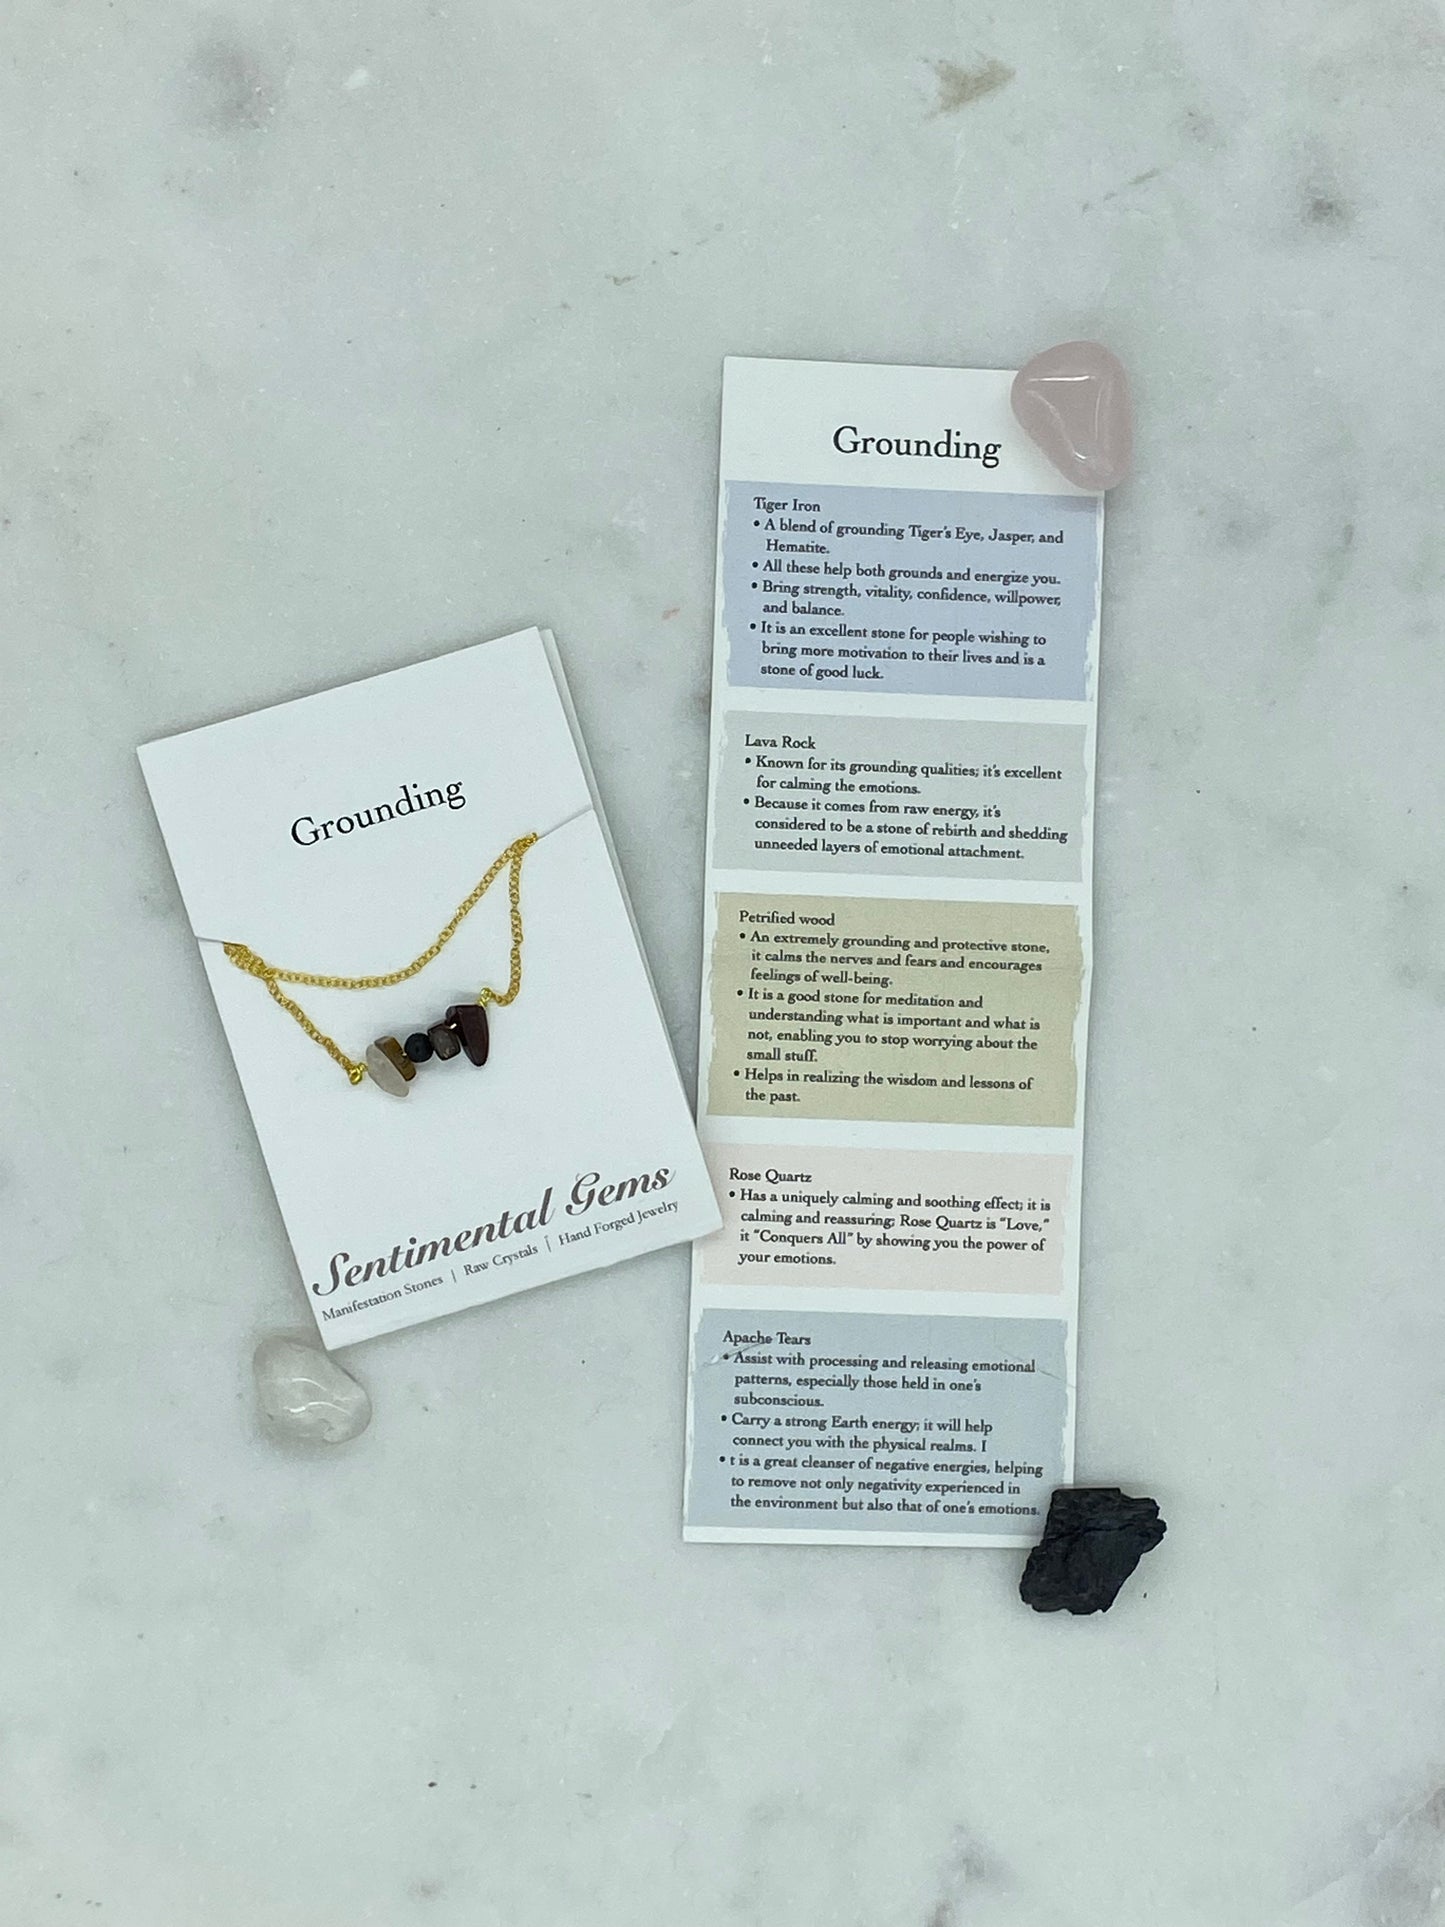 Grounding Crystals Collection - Affirmation: Balance and Stability